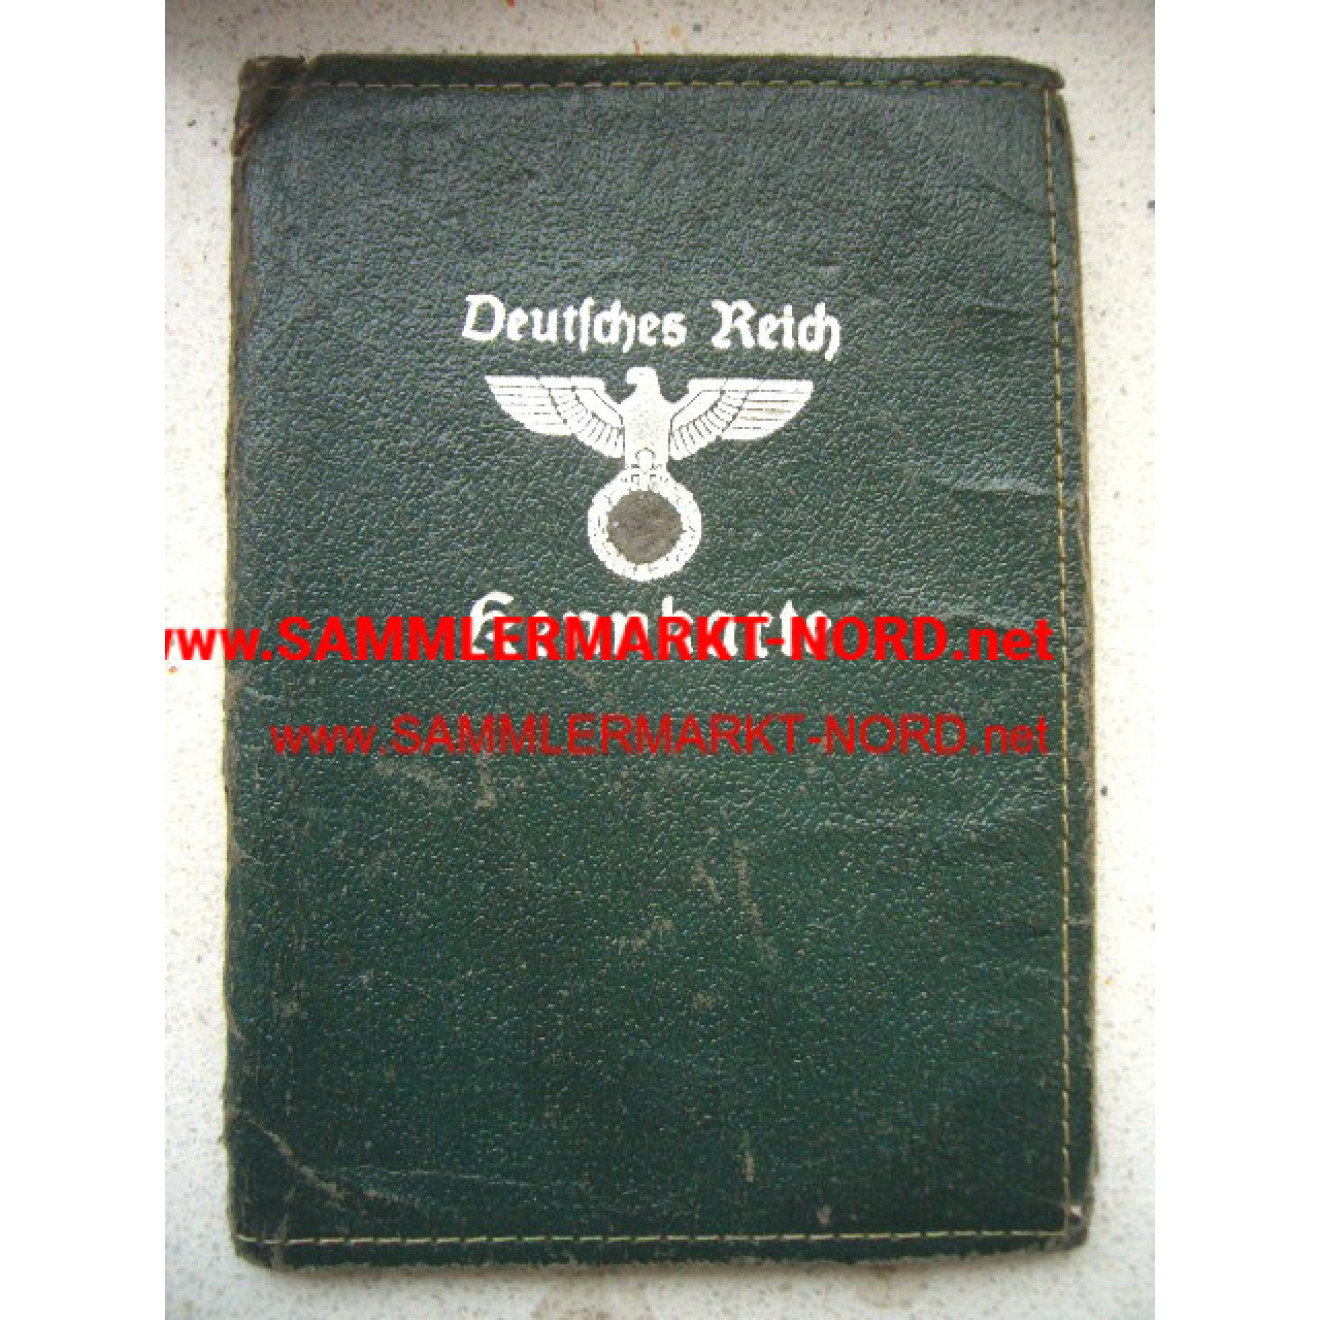 Protective case for the identity card